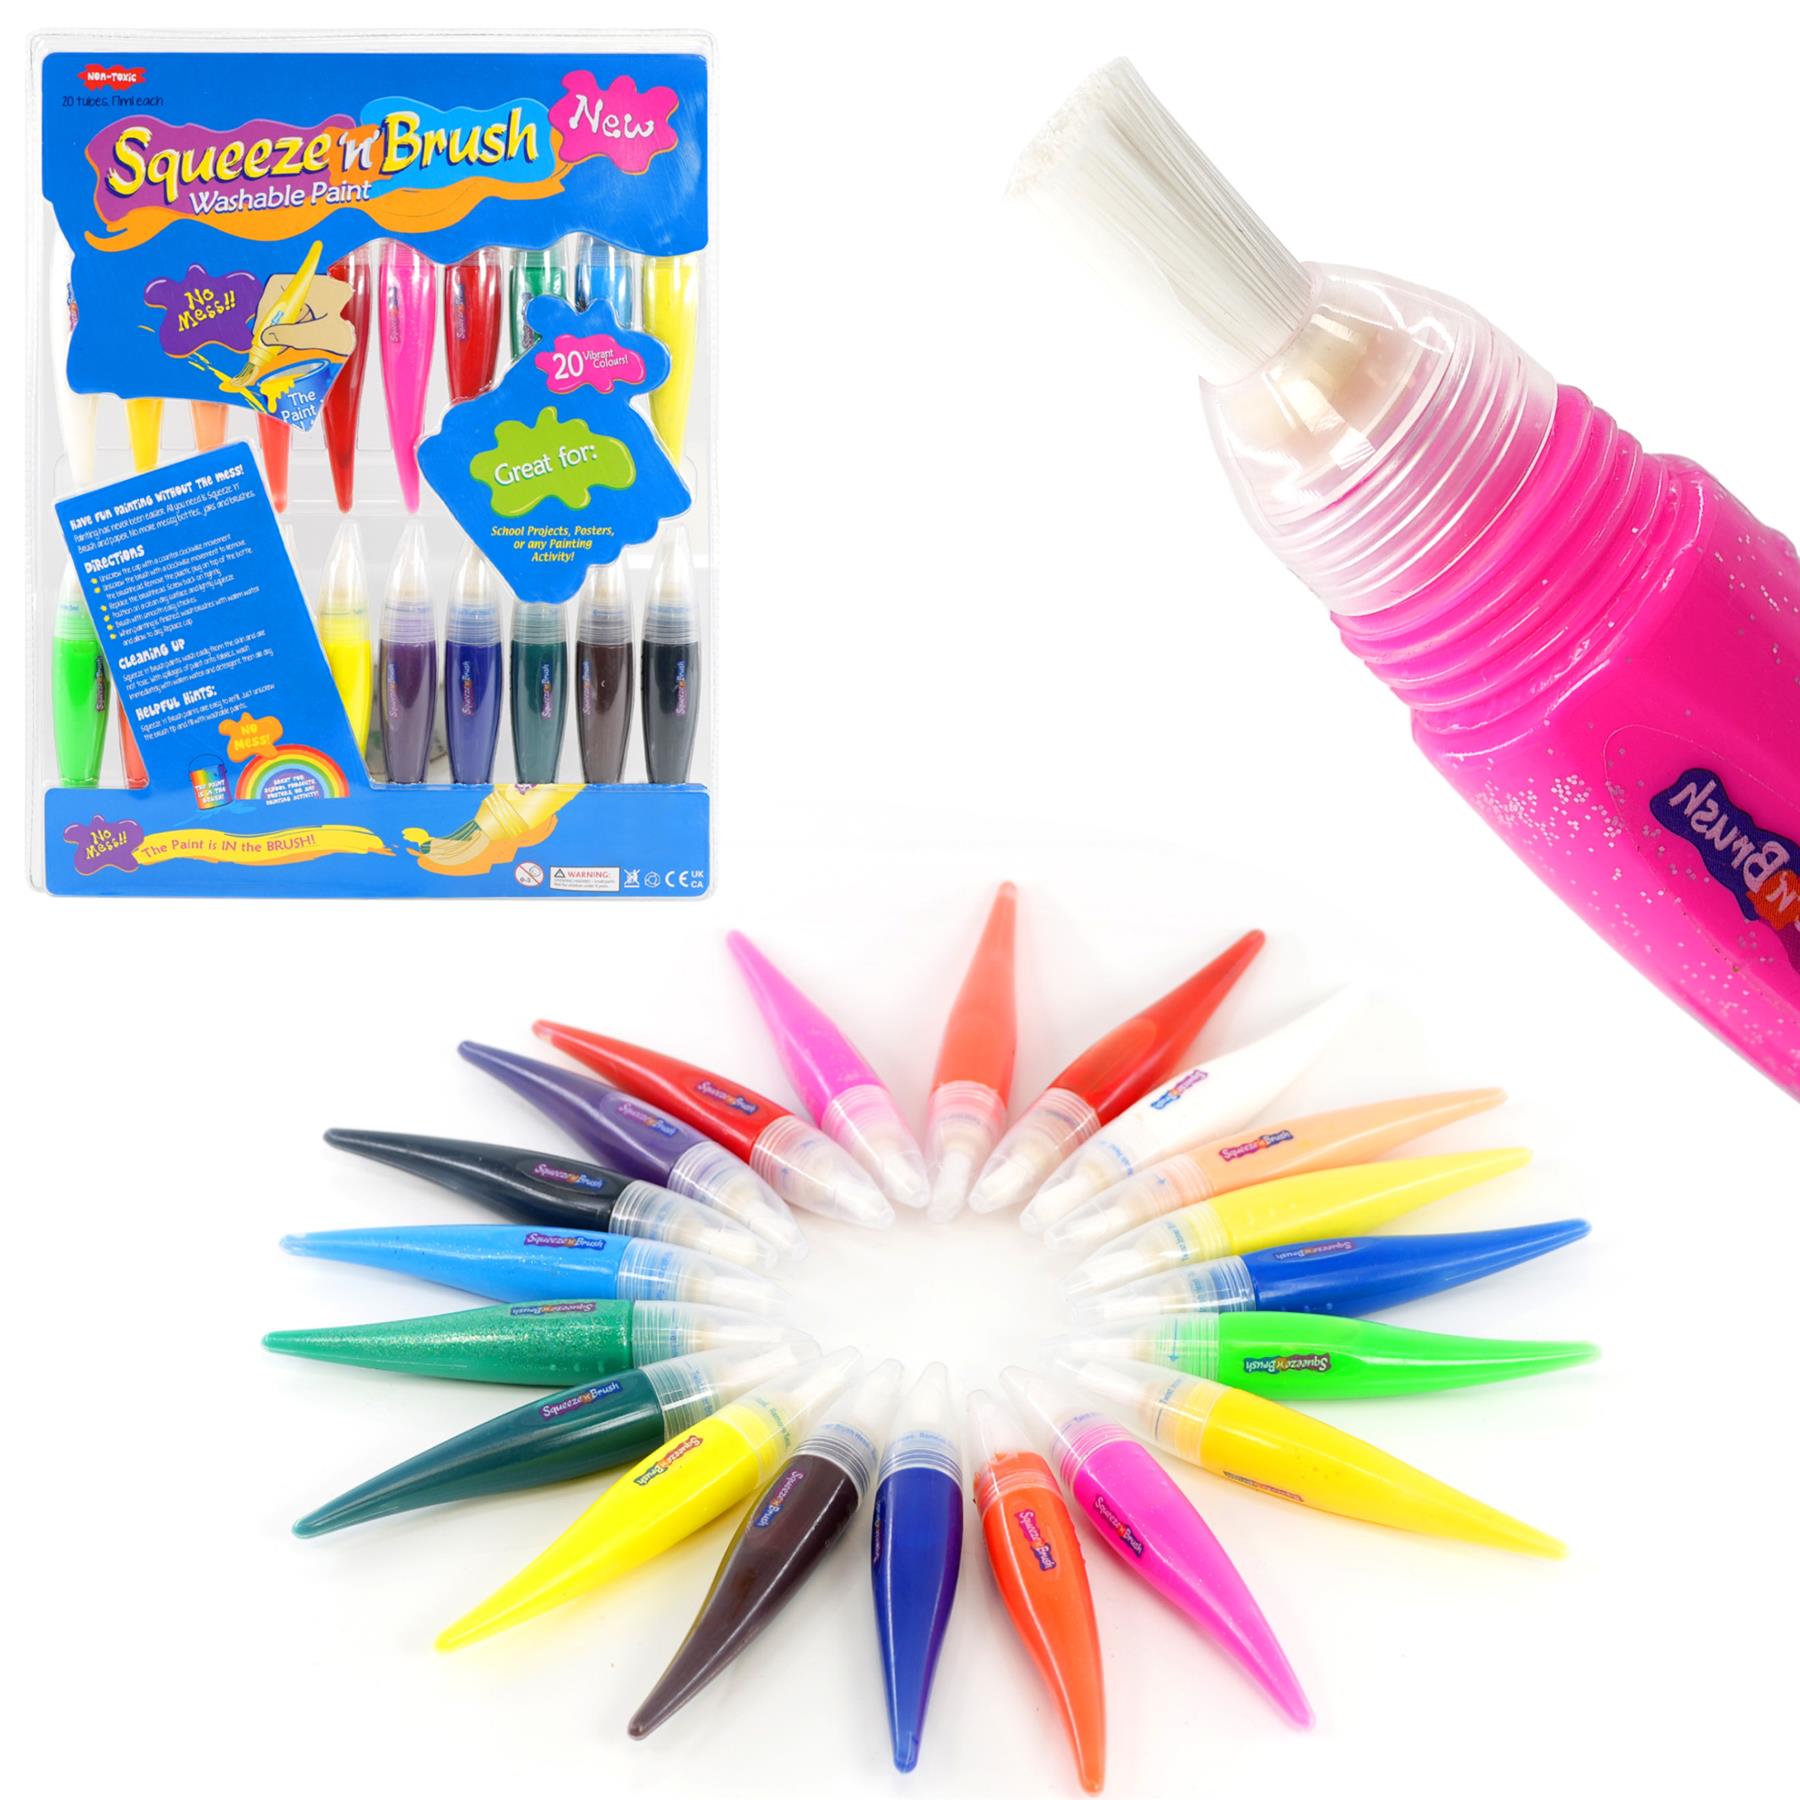 Squeeze n Brush Washable Paint by The Magic Toy Shop - The Magic Toy Shop